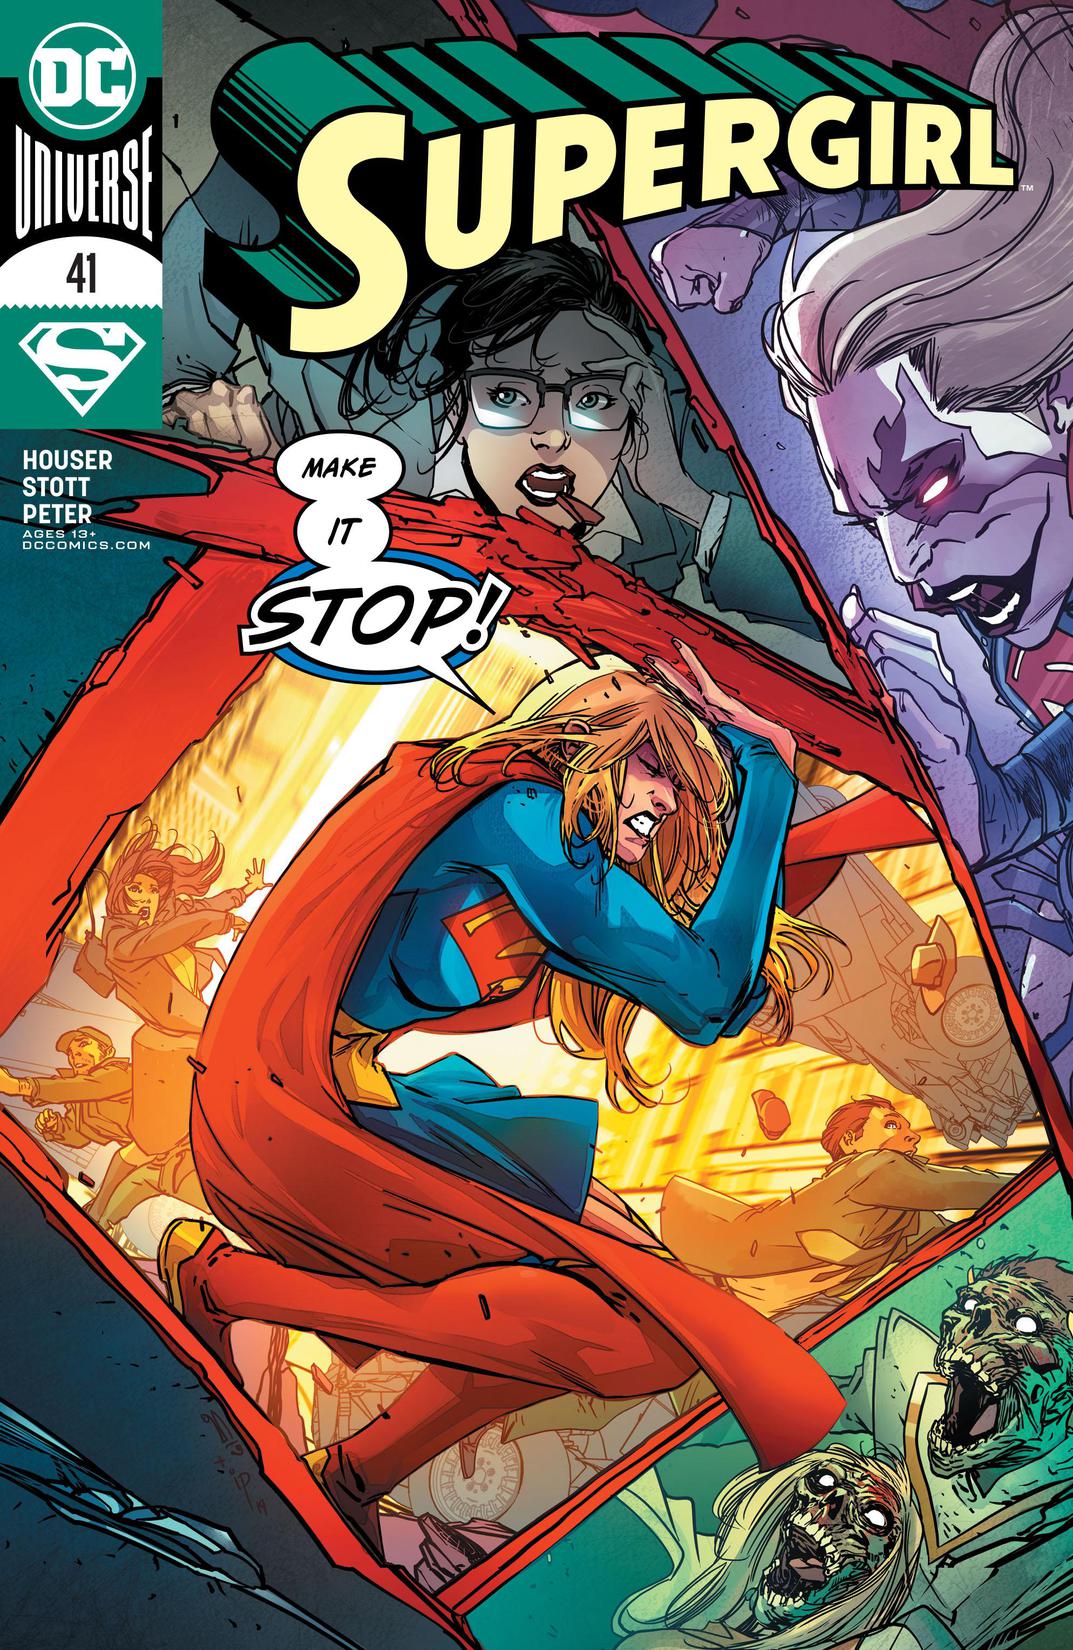 Supergirl (2016-2020) #41 preview images